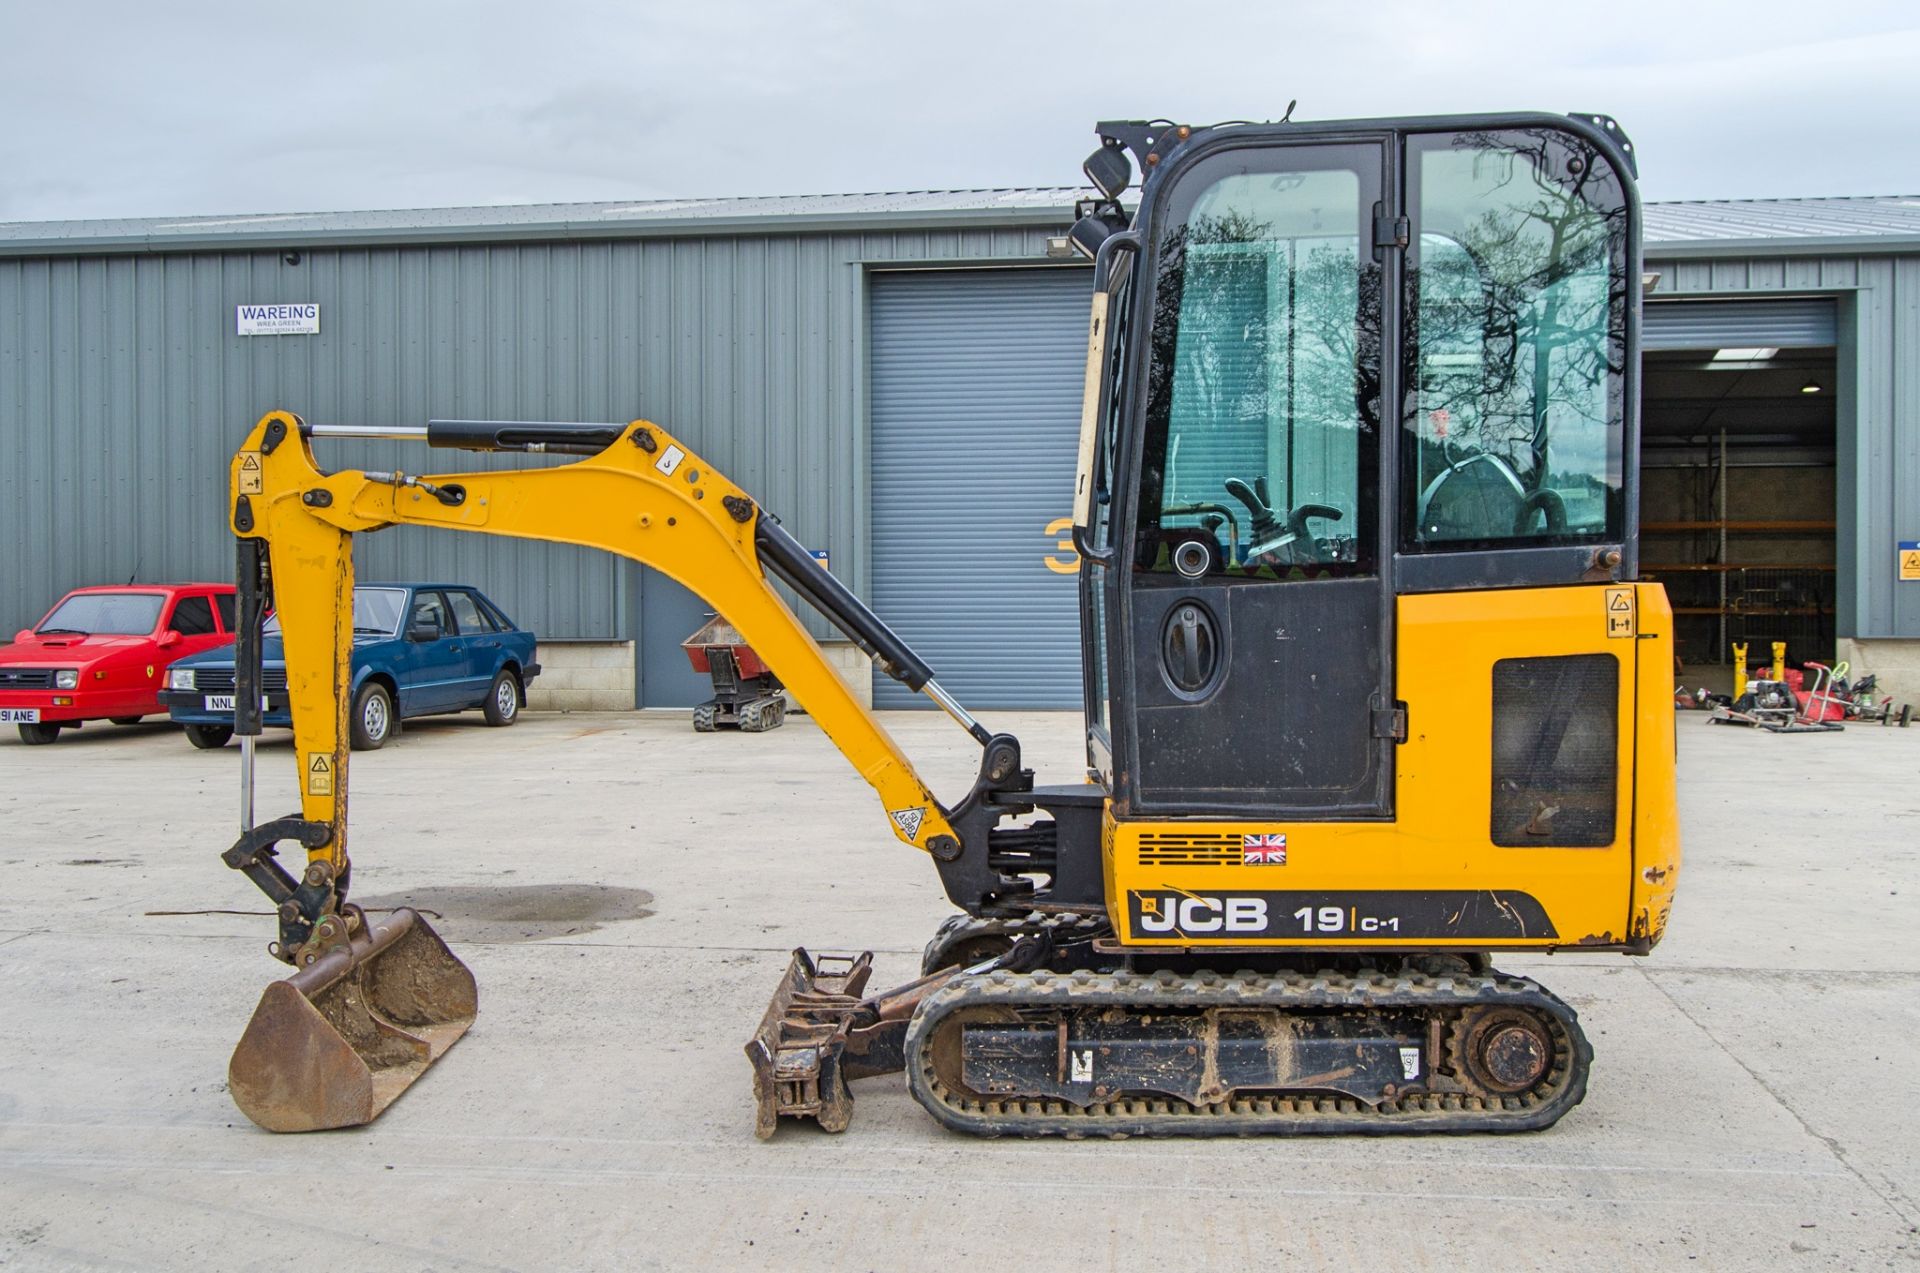 JCB 19 C-1 1.9 tonne rubber tracked mini excavator Year: 2017 S/N: 2494021 Recorded Hours: 1063 - Image 7 of 26